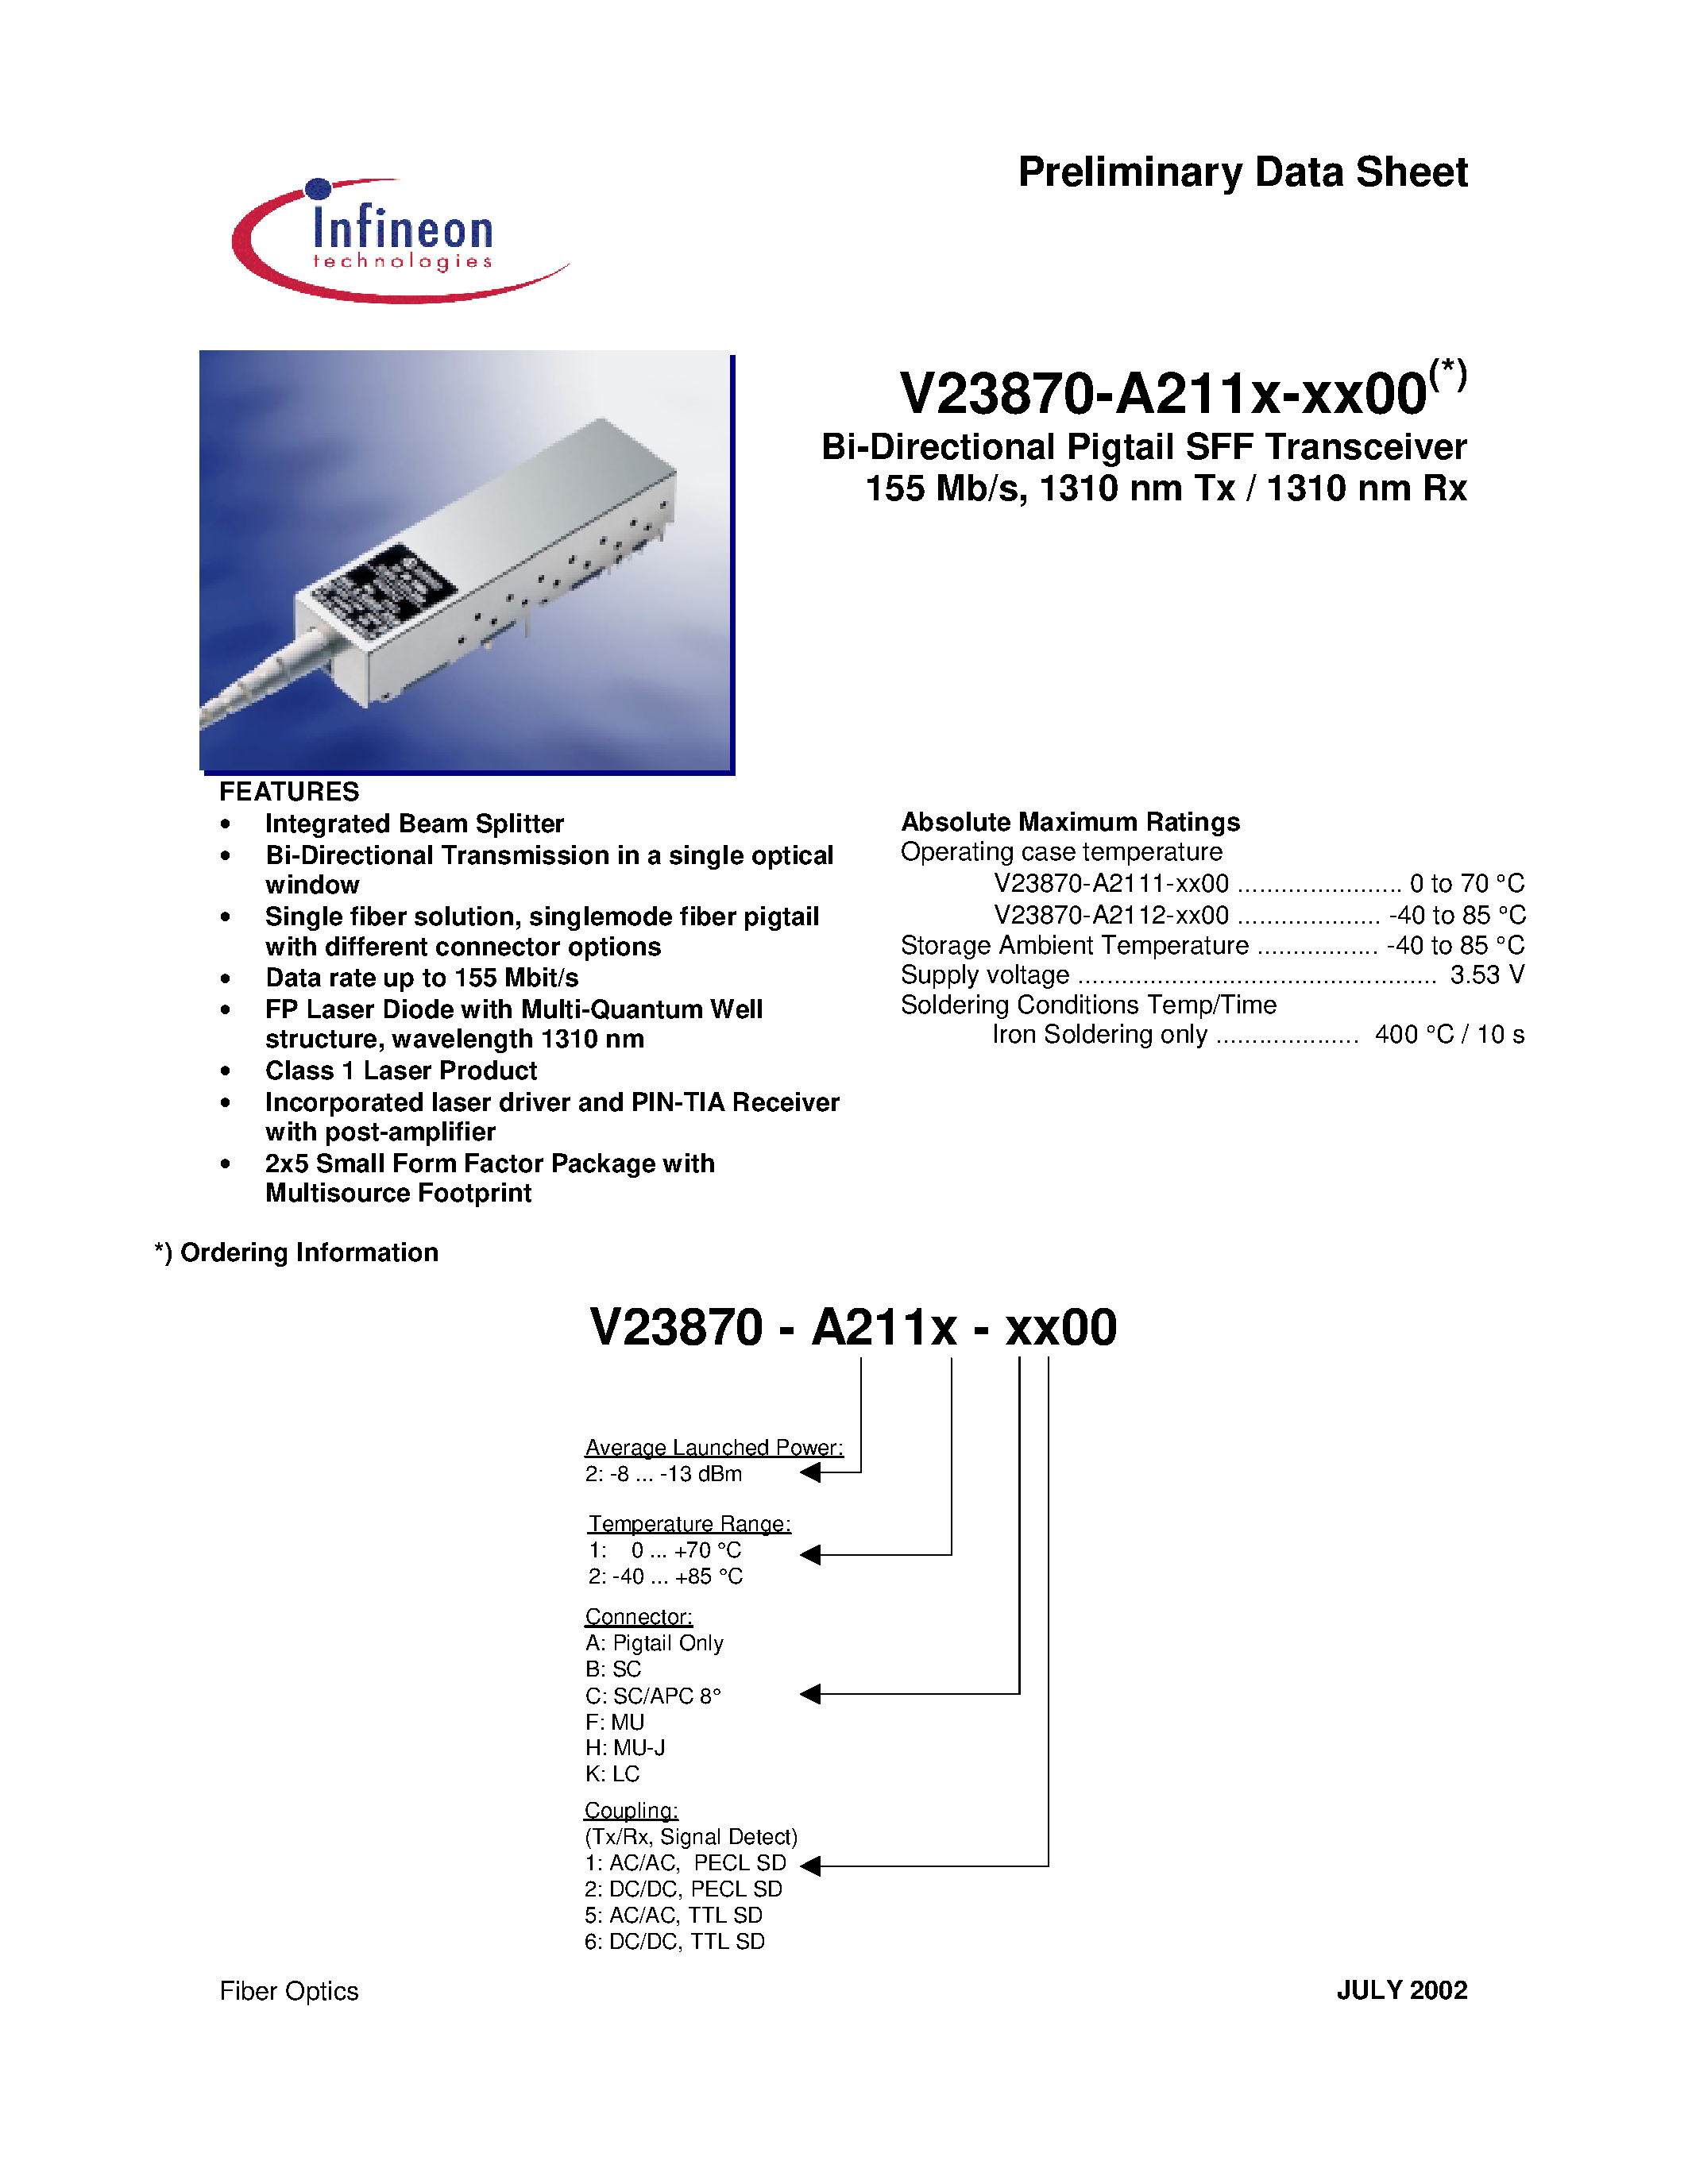 Datasheet V23870-A2112-H600 - Bi-Directional Pigtail SFF Transceiver 155 Mb/s/ 1310 nm Tx / 1310 nm Rx page 1